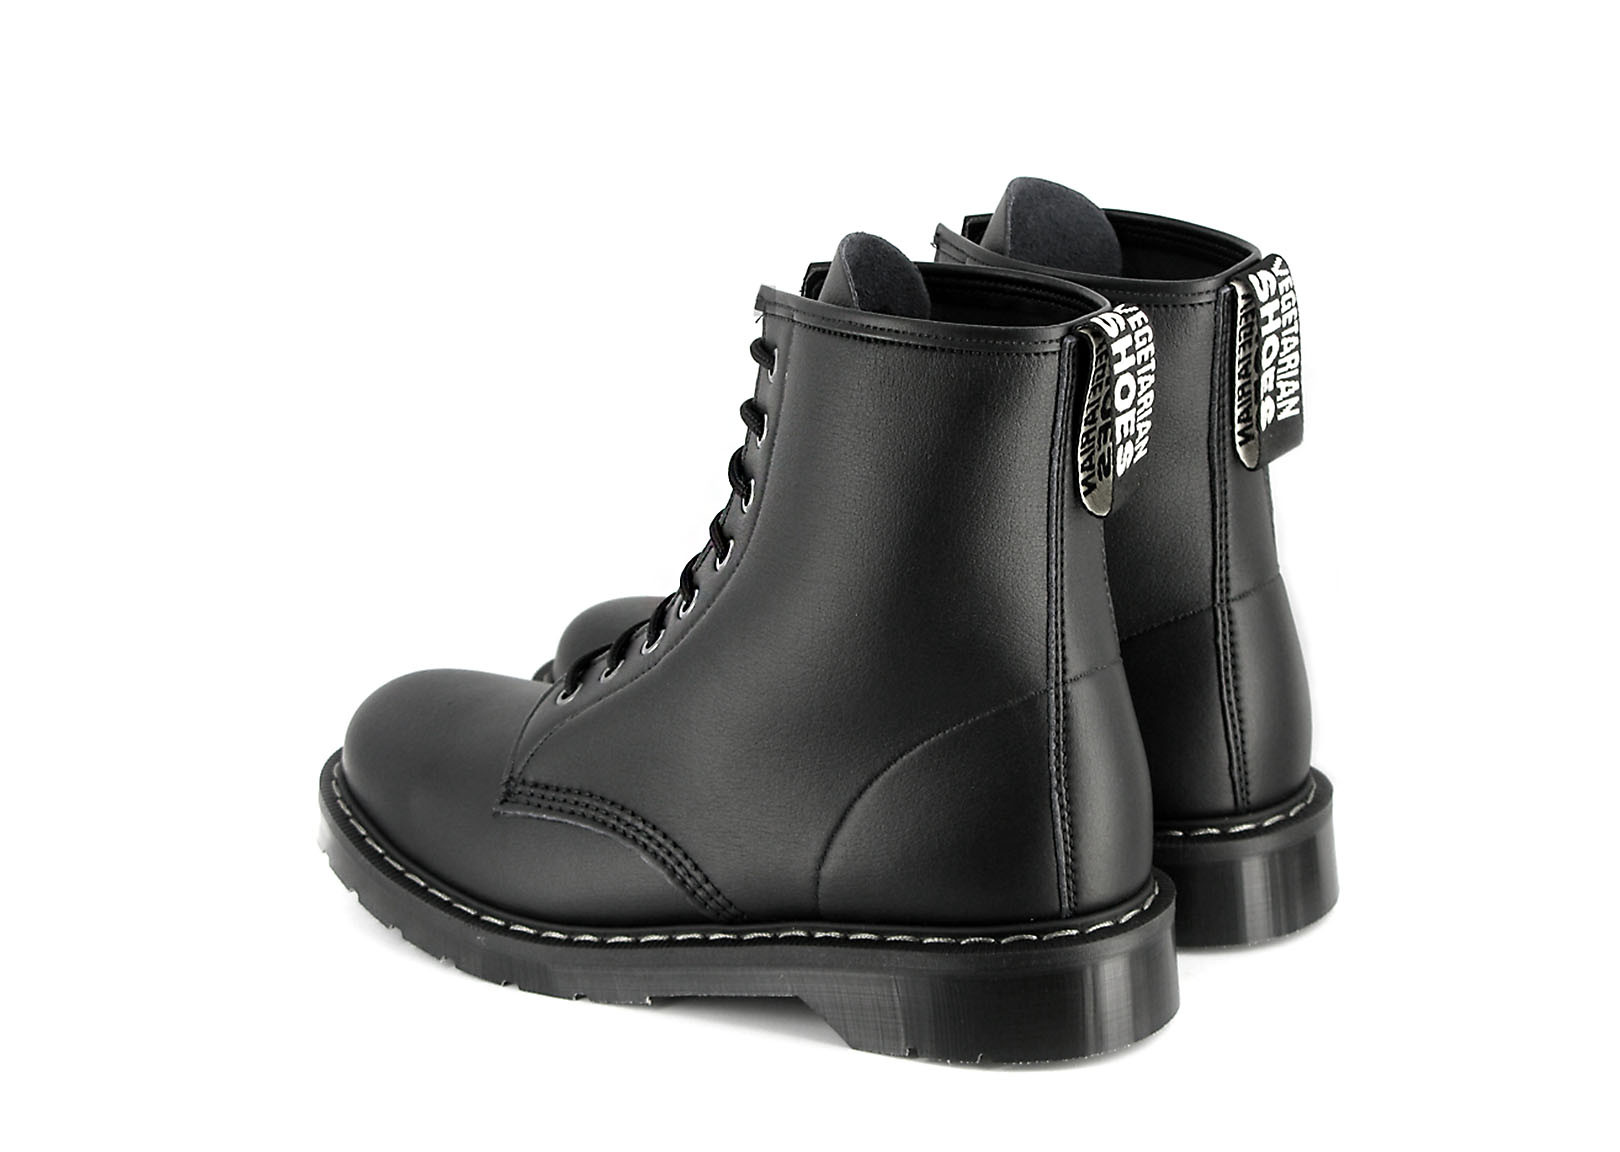 Airseal Monkey Boot (Black) | Monkey boots, Vegetarian shoes, Boots